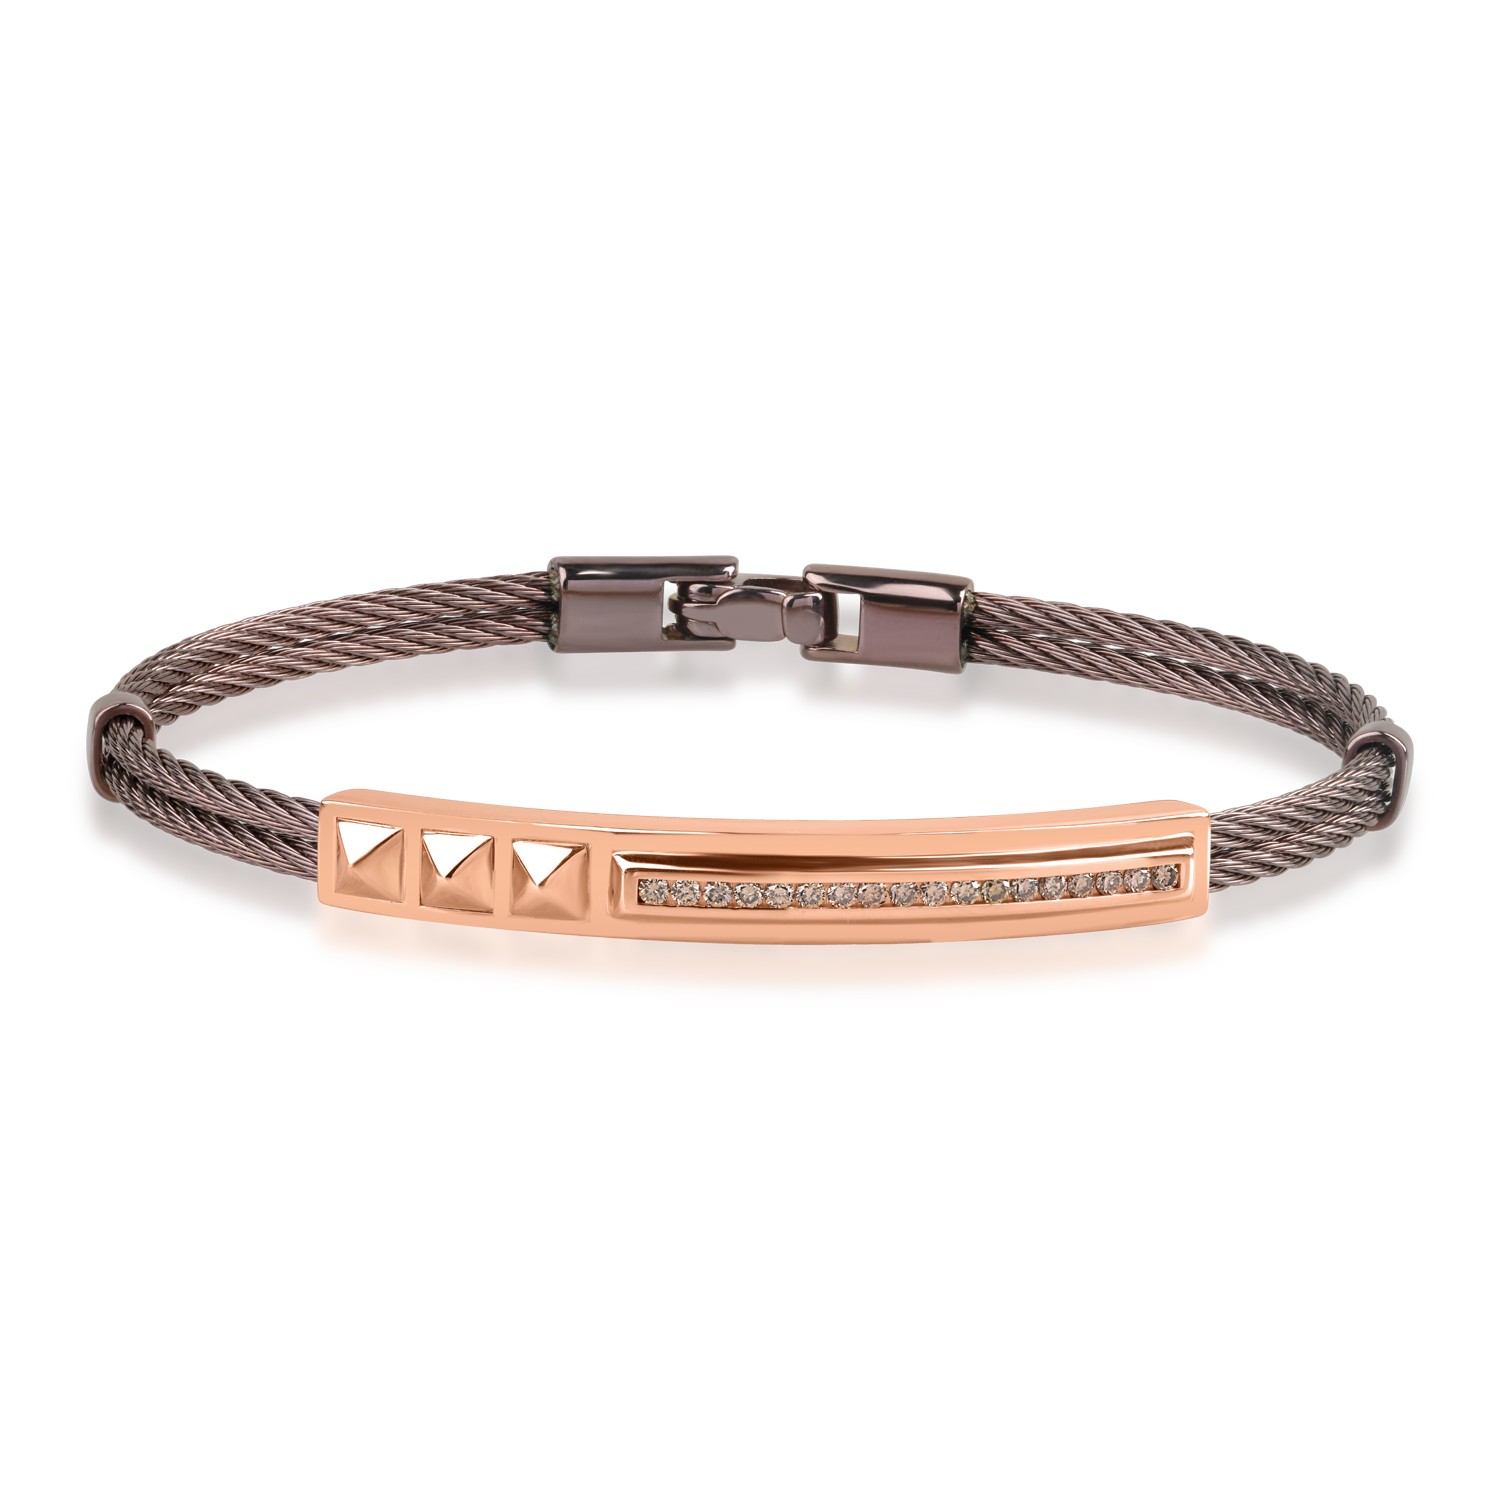 Rose gold and steel bracelet with 0.27ct brown diamond